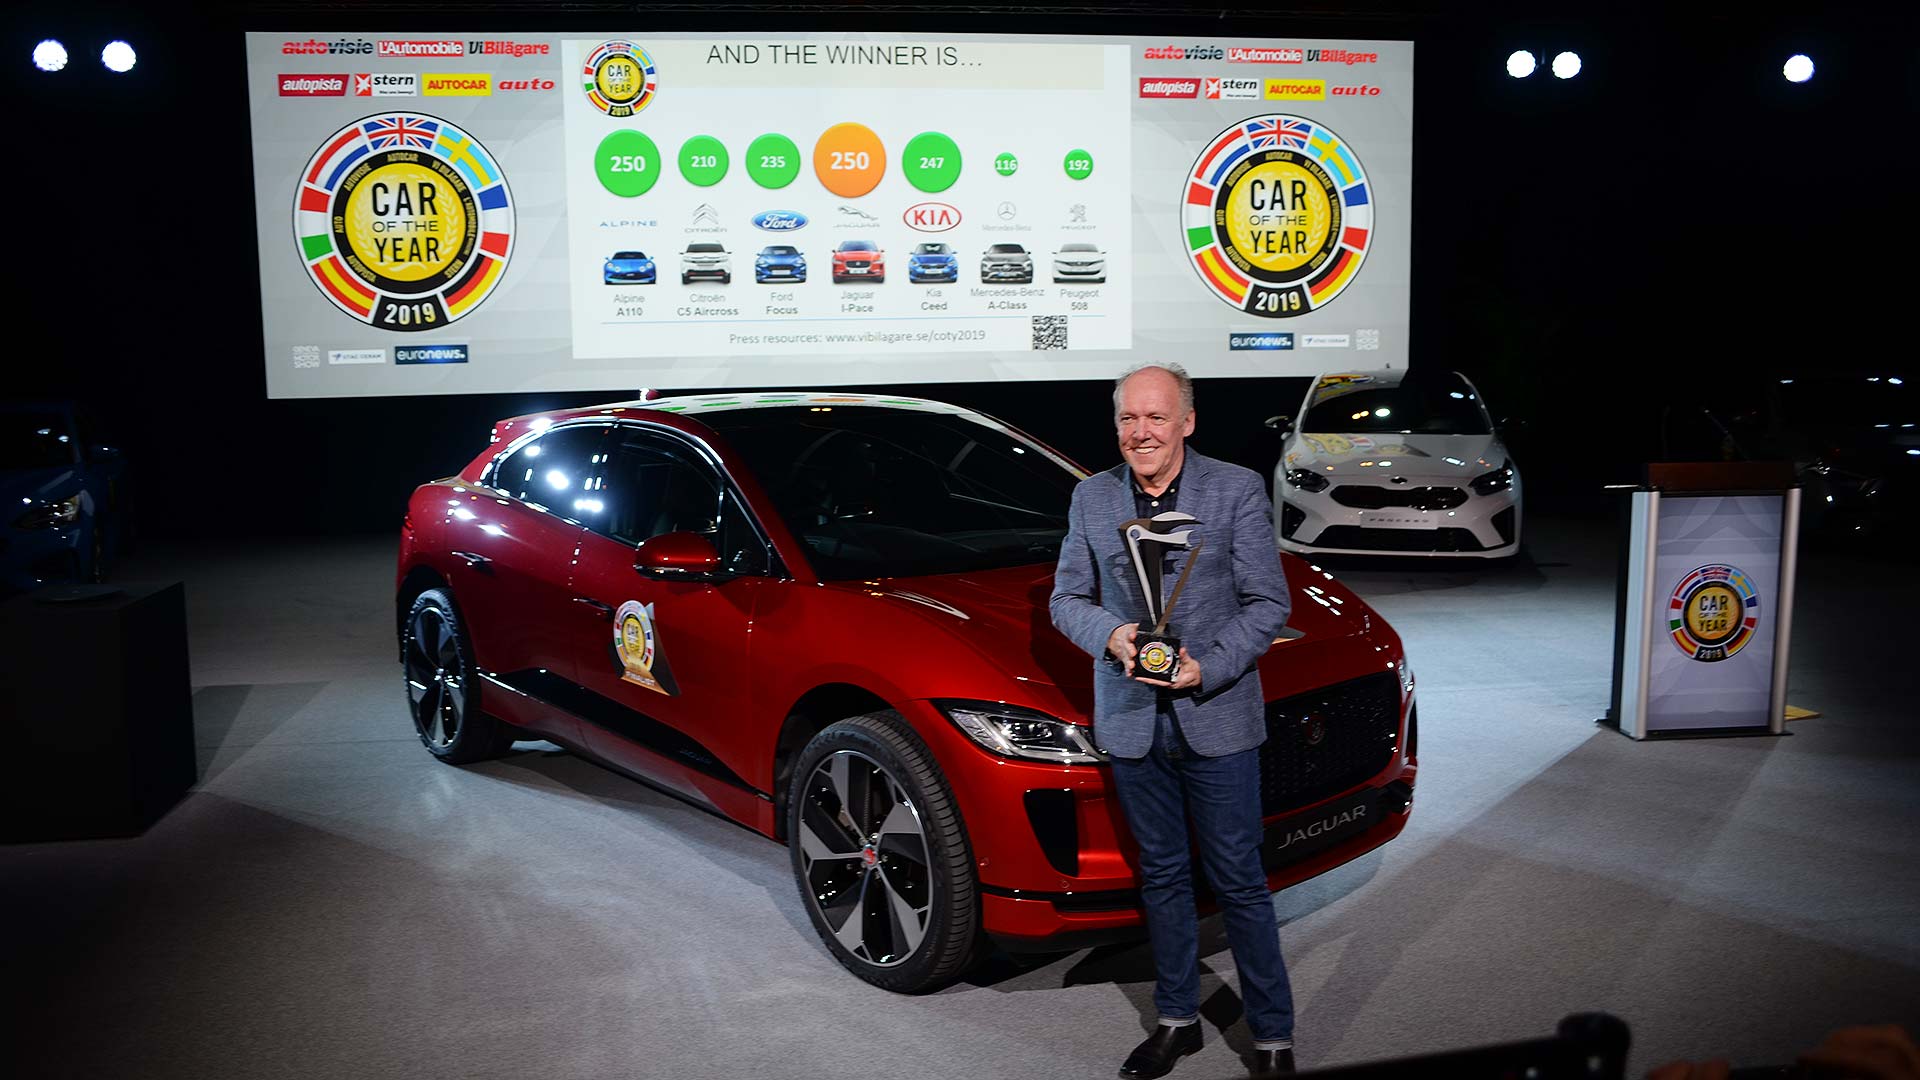 Jaguar I-Pace Car of the Year 2019